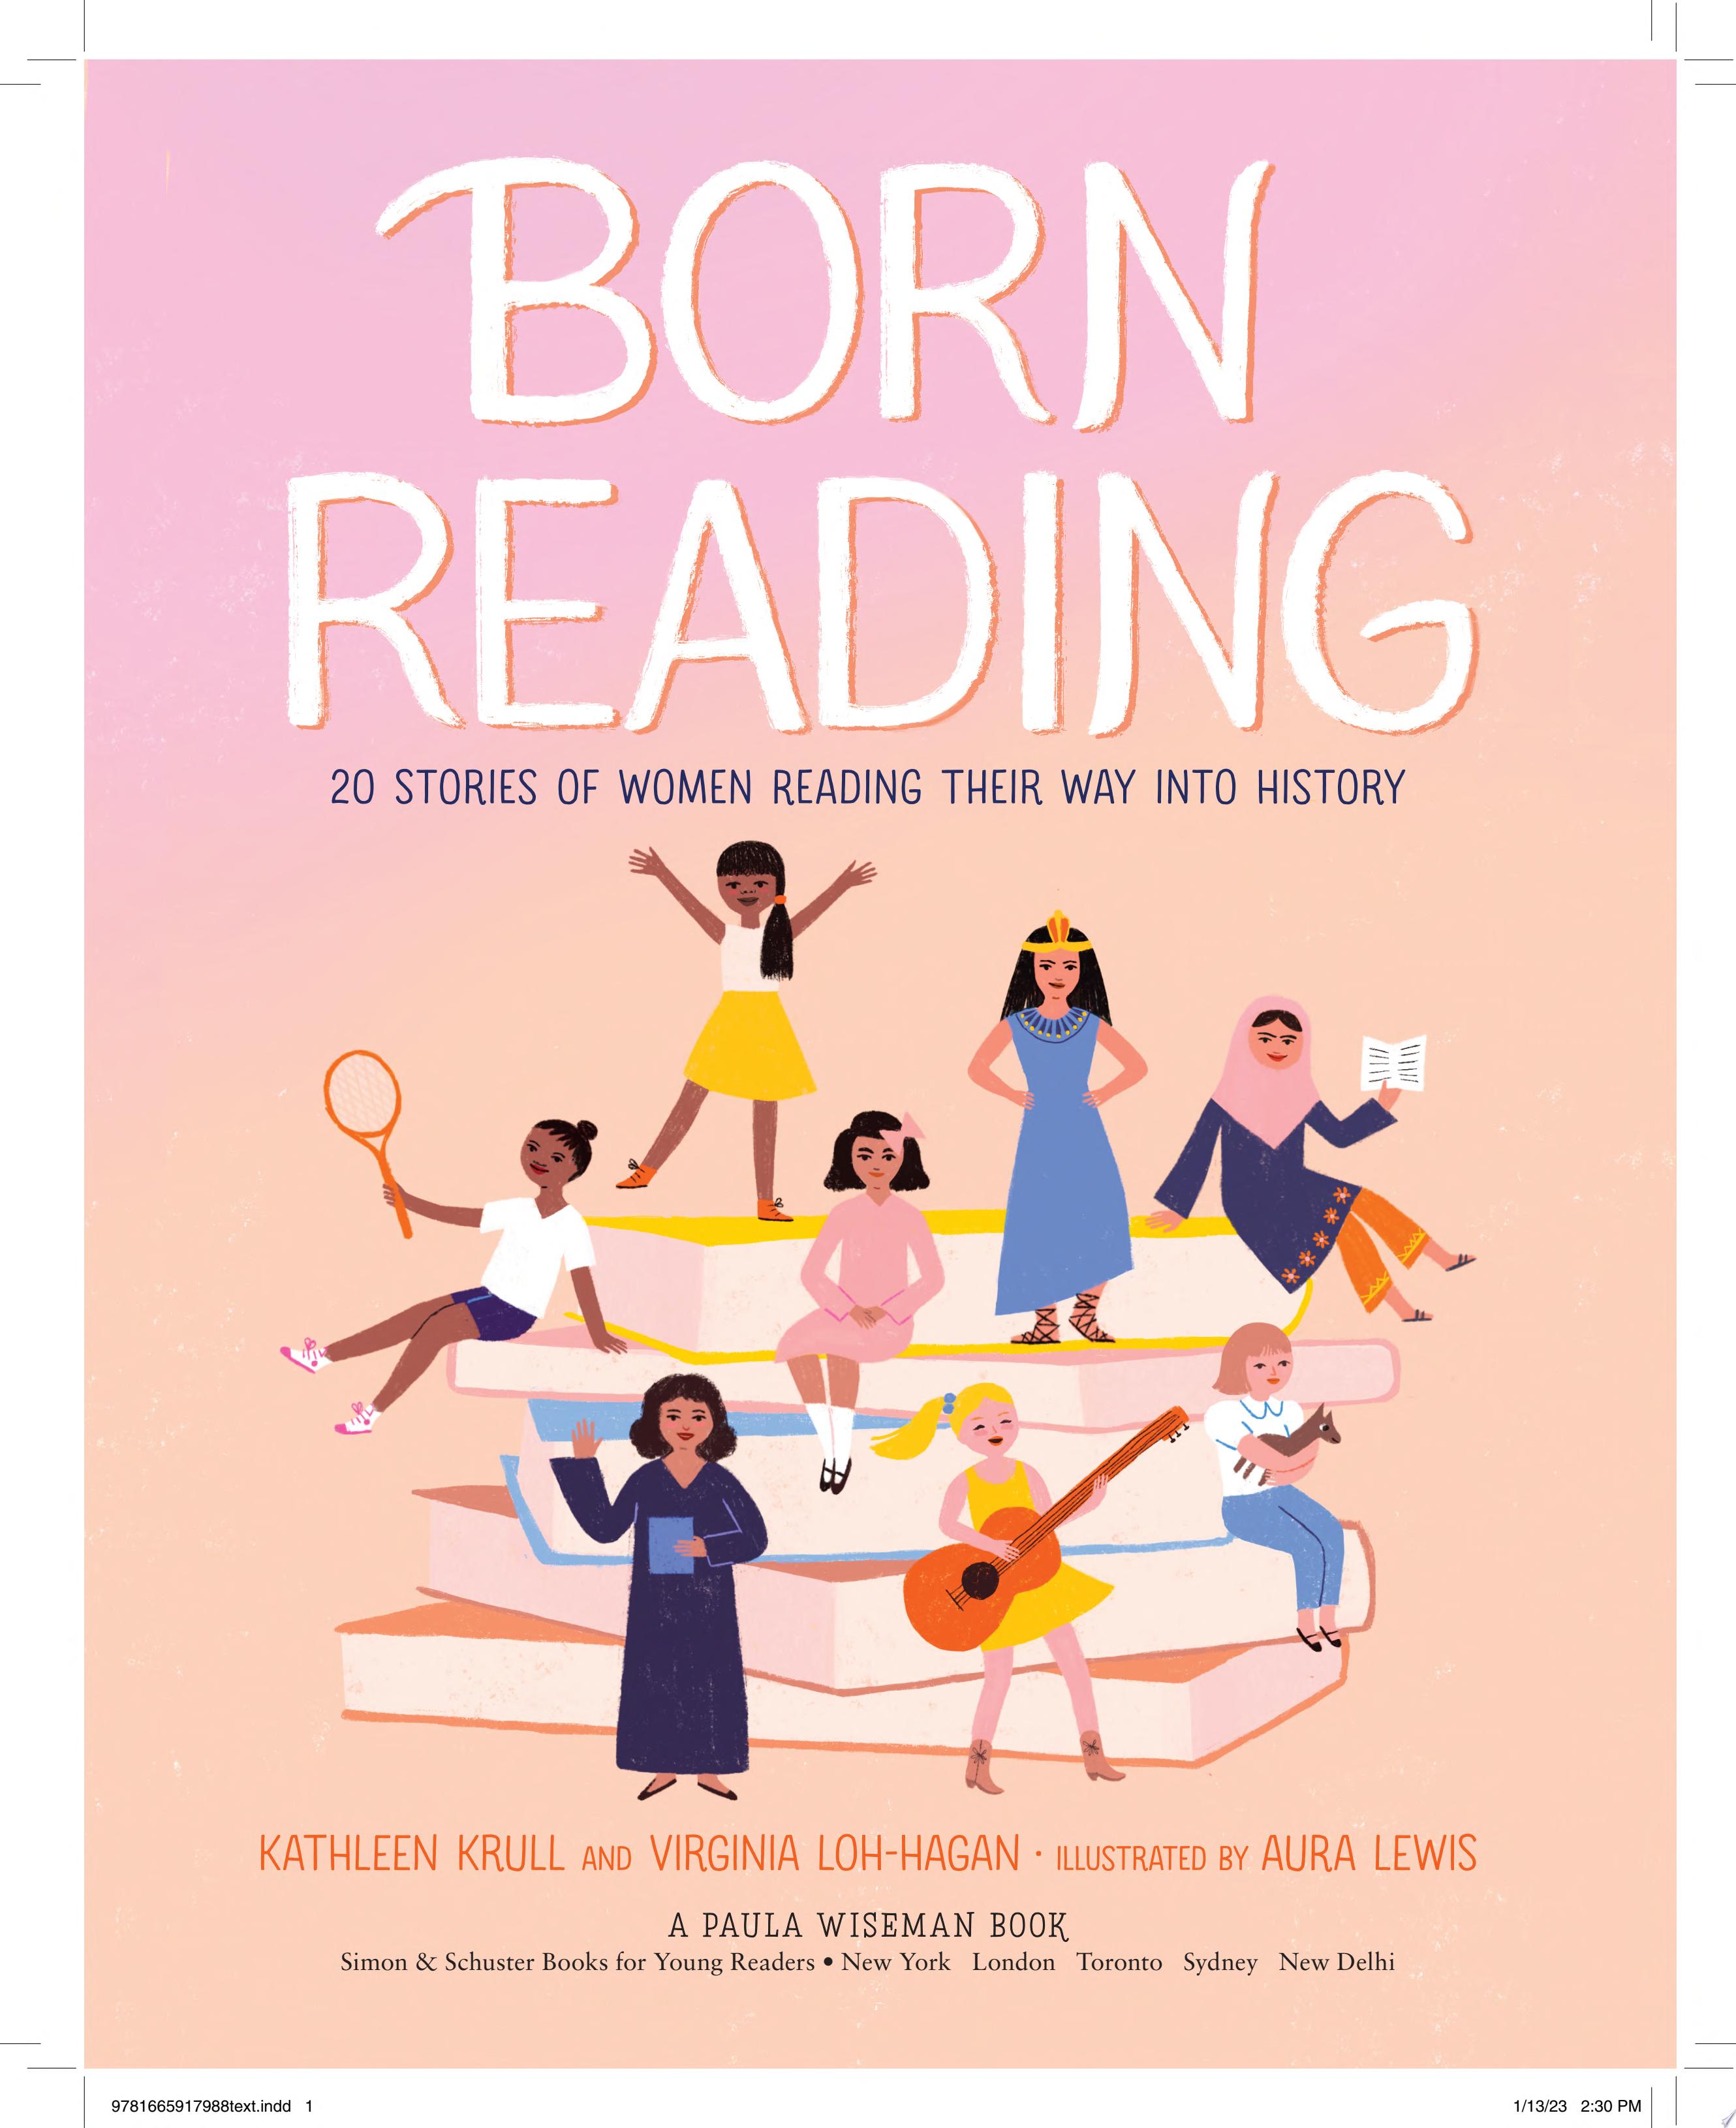 Image for "Born Reading"